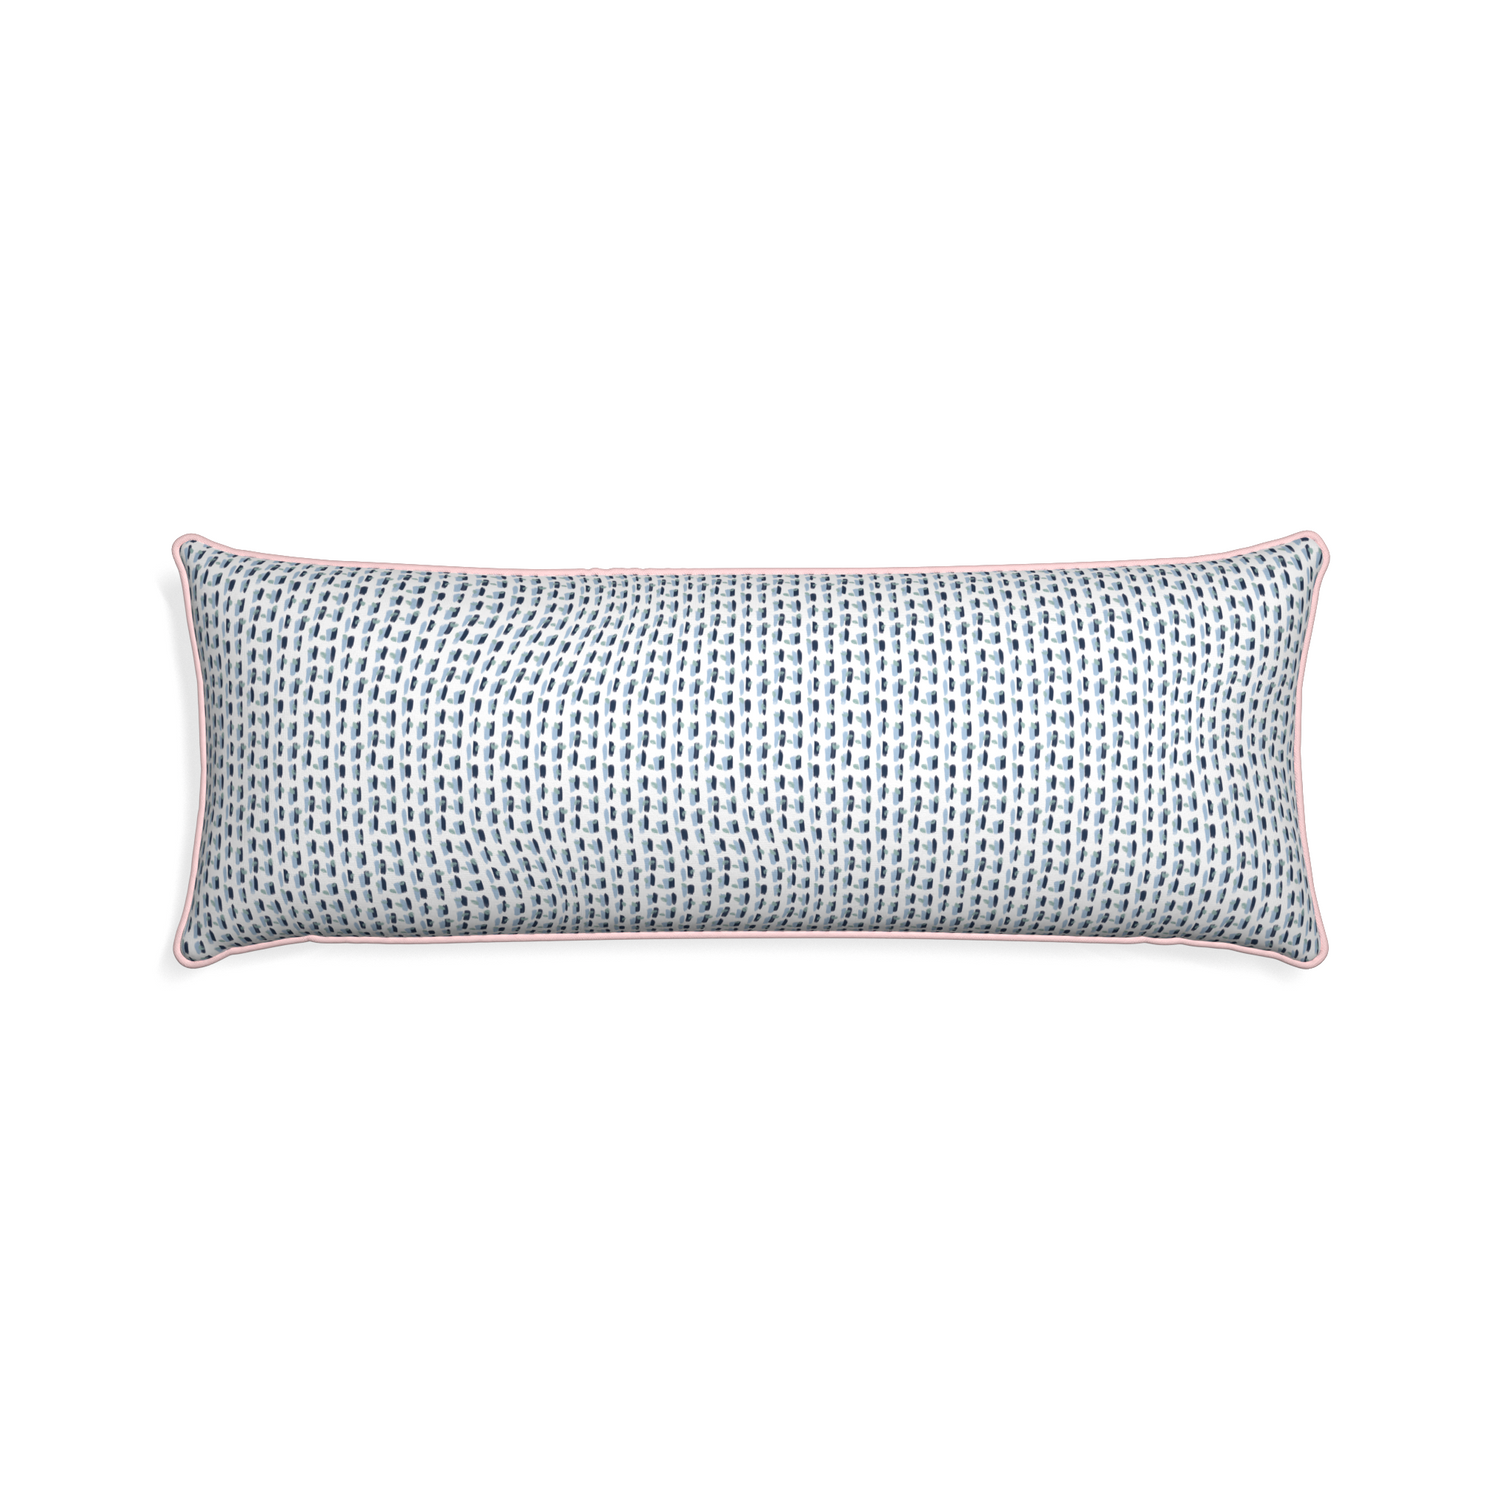 Xl-lumbar poppy blue custom pillow with petal piping on white background